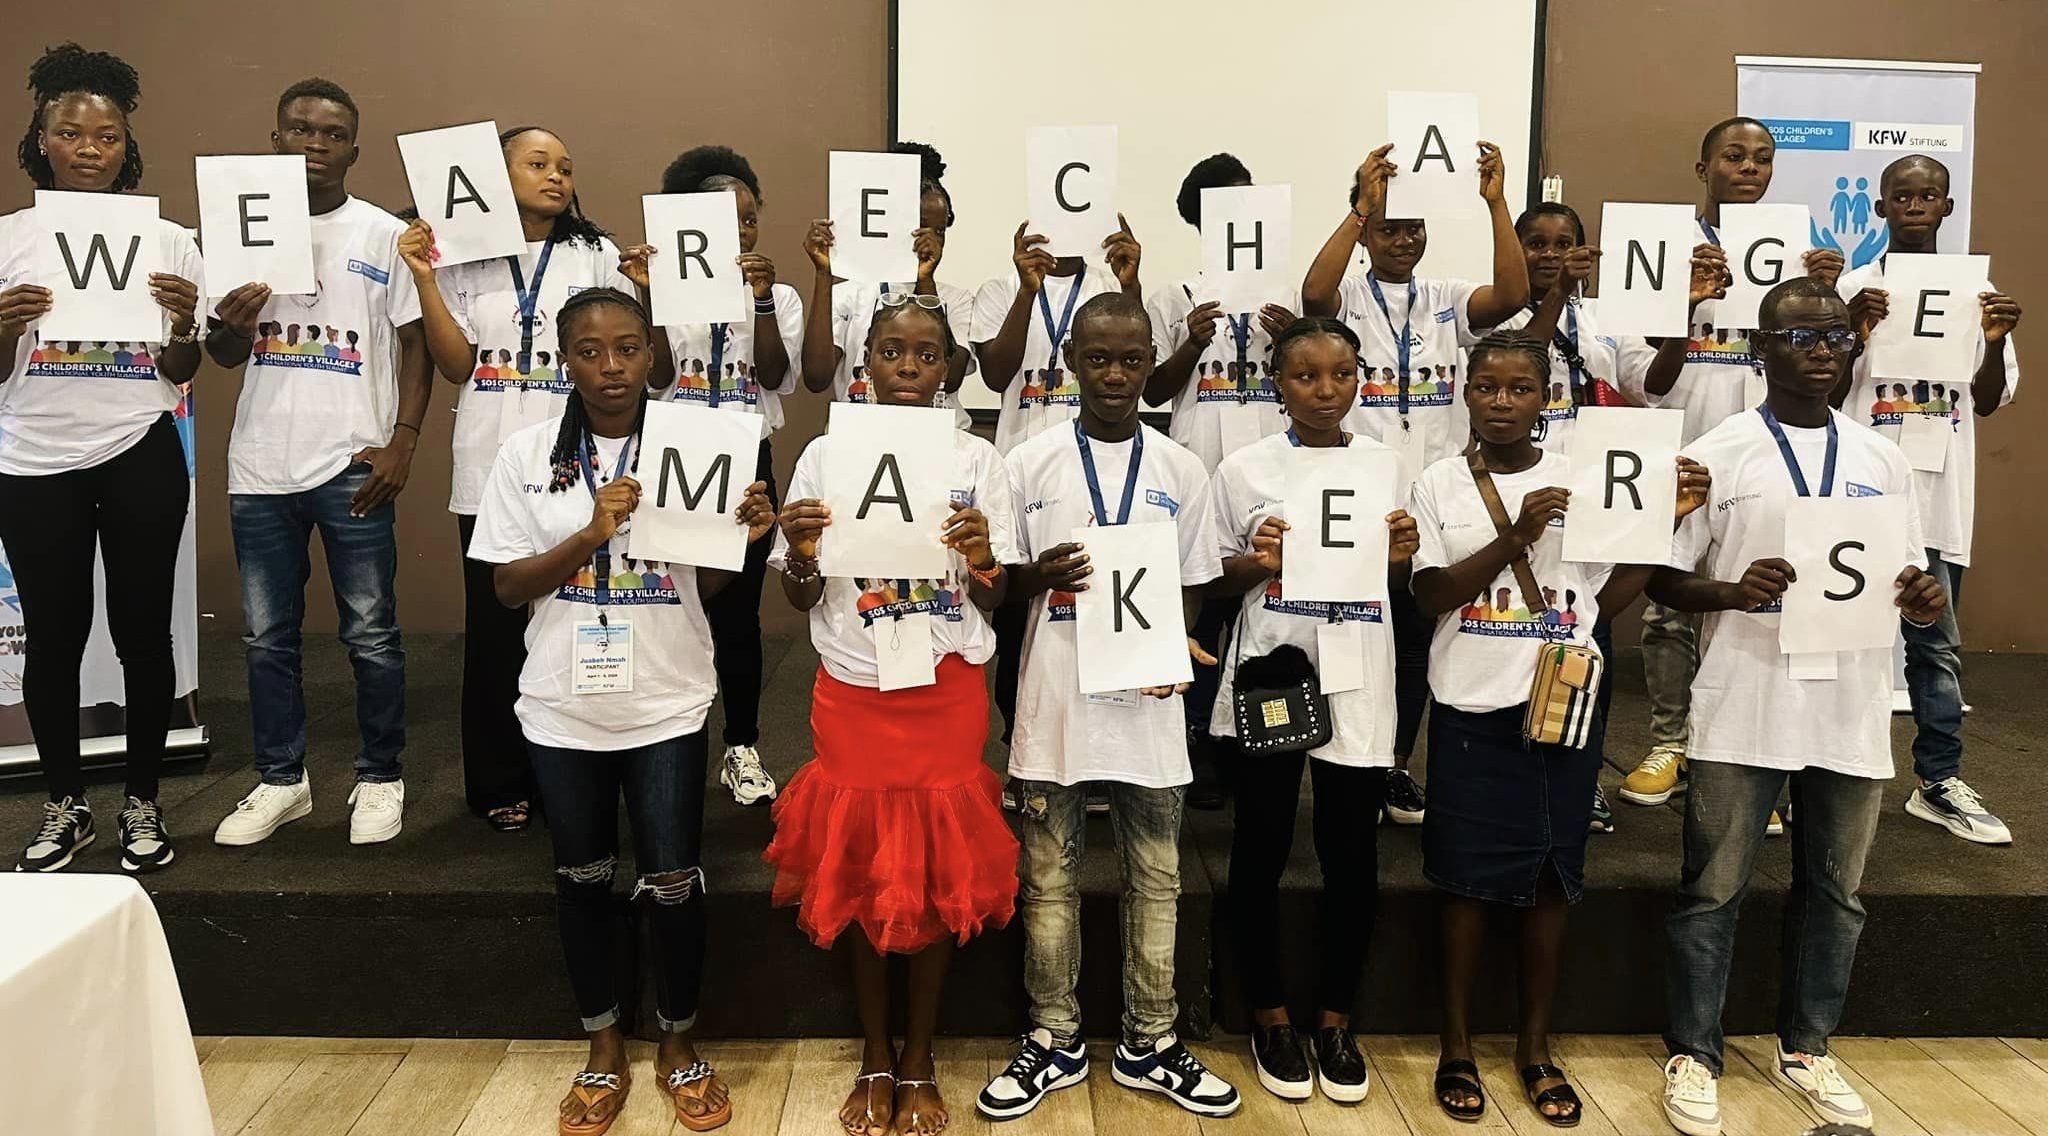 Youth Empowerment Takes Center Stage at the first Youth Power summit in Liberia